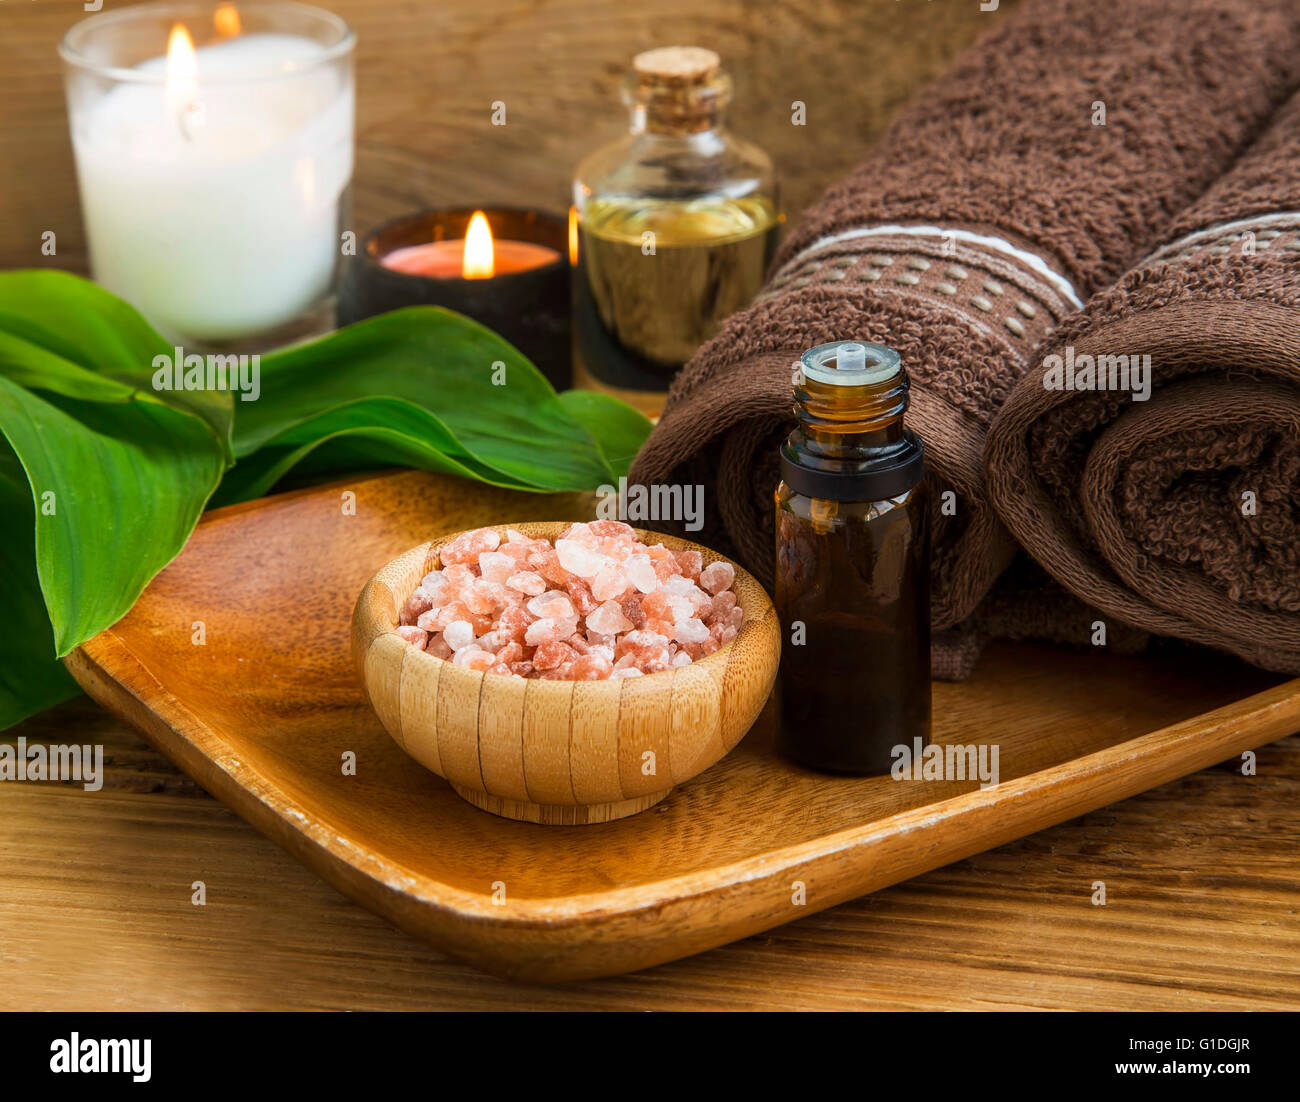 Spa treatment with salt and oil, with candles and cotton towels Stock Photo